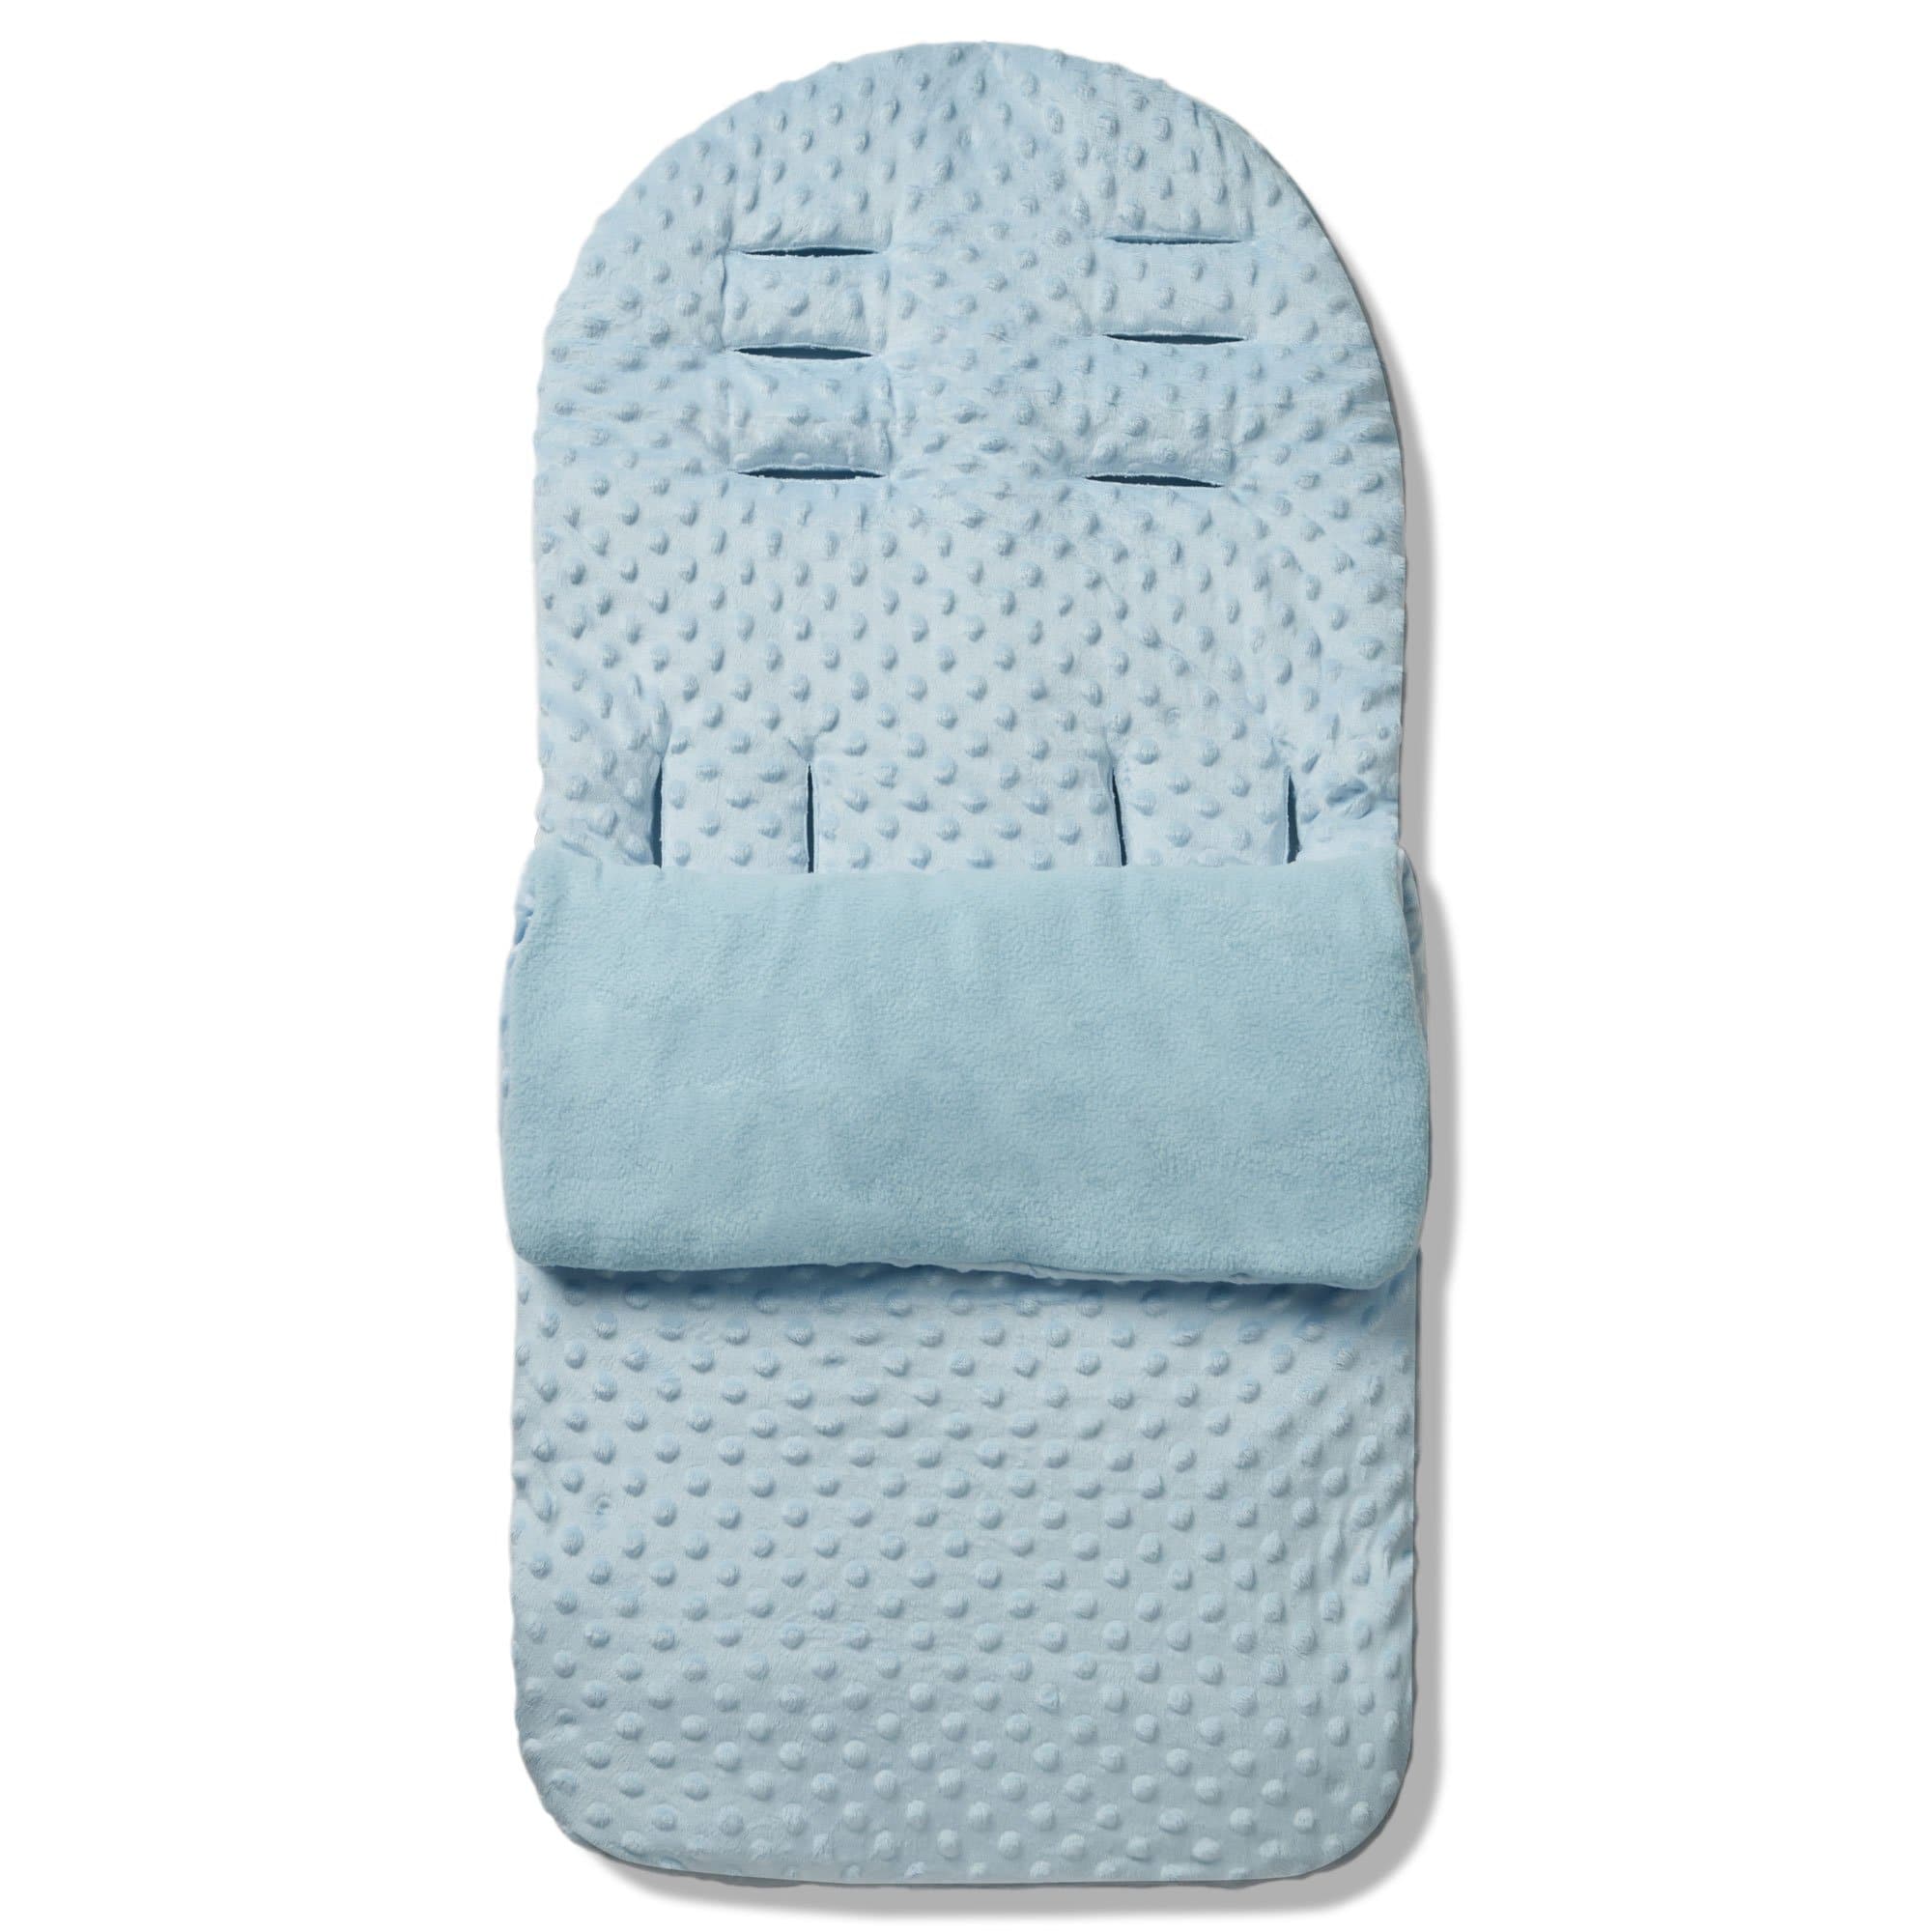 Dimple Footmuff / Cosy Toes Compatible with Valco - Blue / Fits All Models | For Your Little One